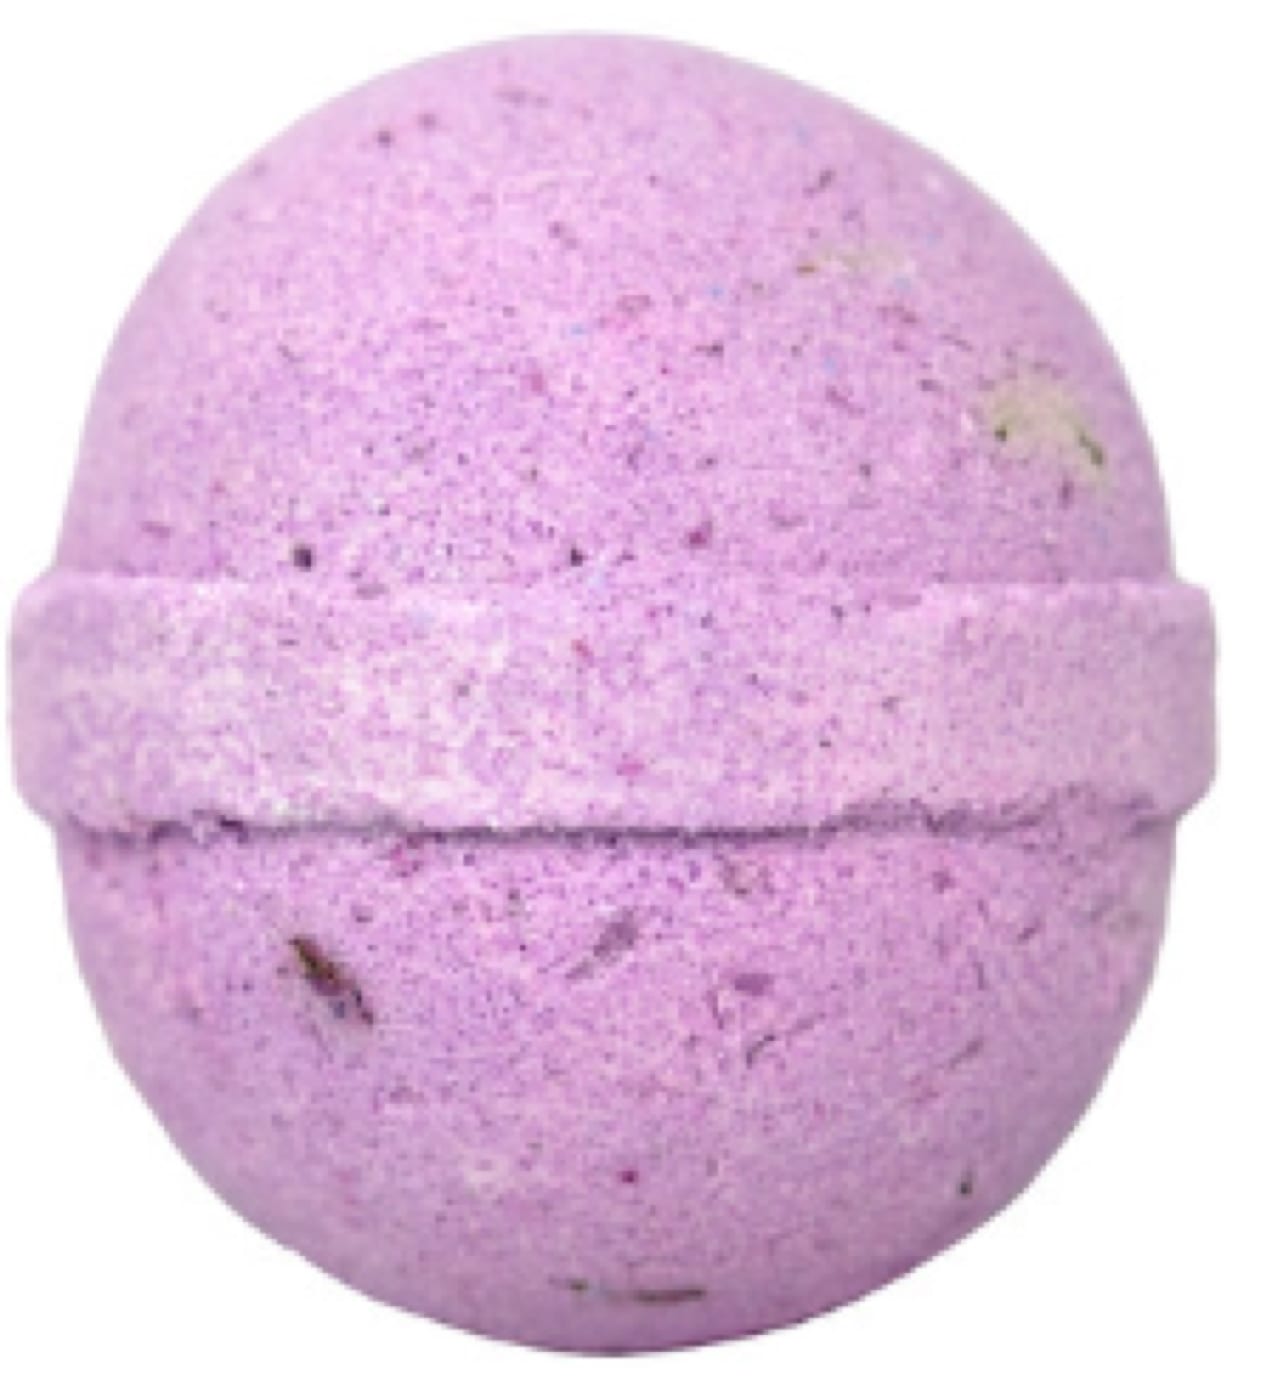 pink bath bomb on a white background